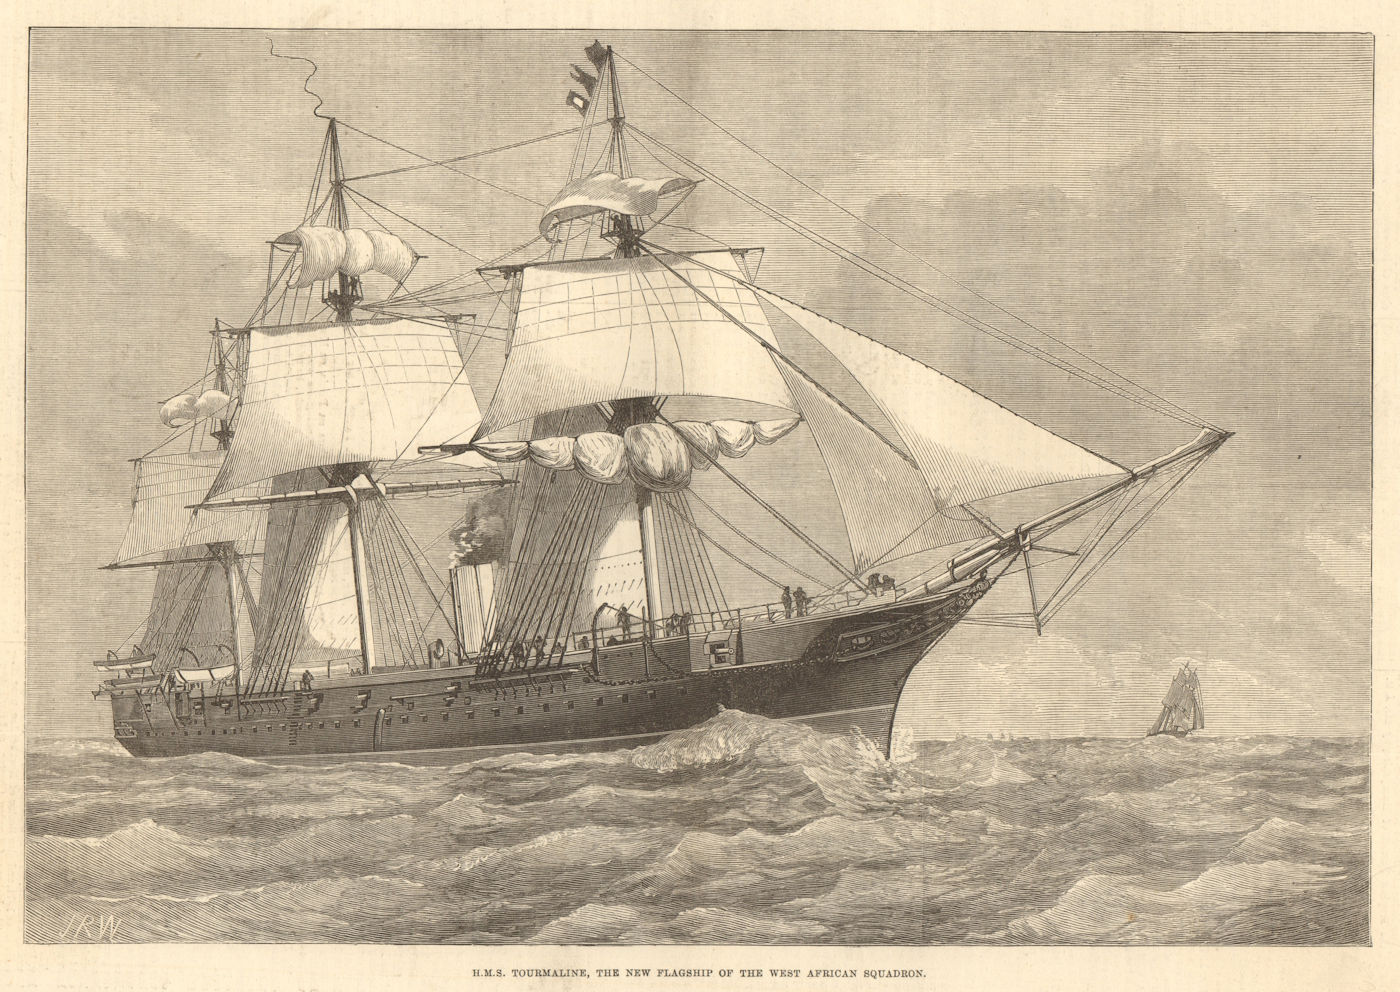 Associate Product H. M. S. Tourmaline, the new flagship of the West African Squadron 1876